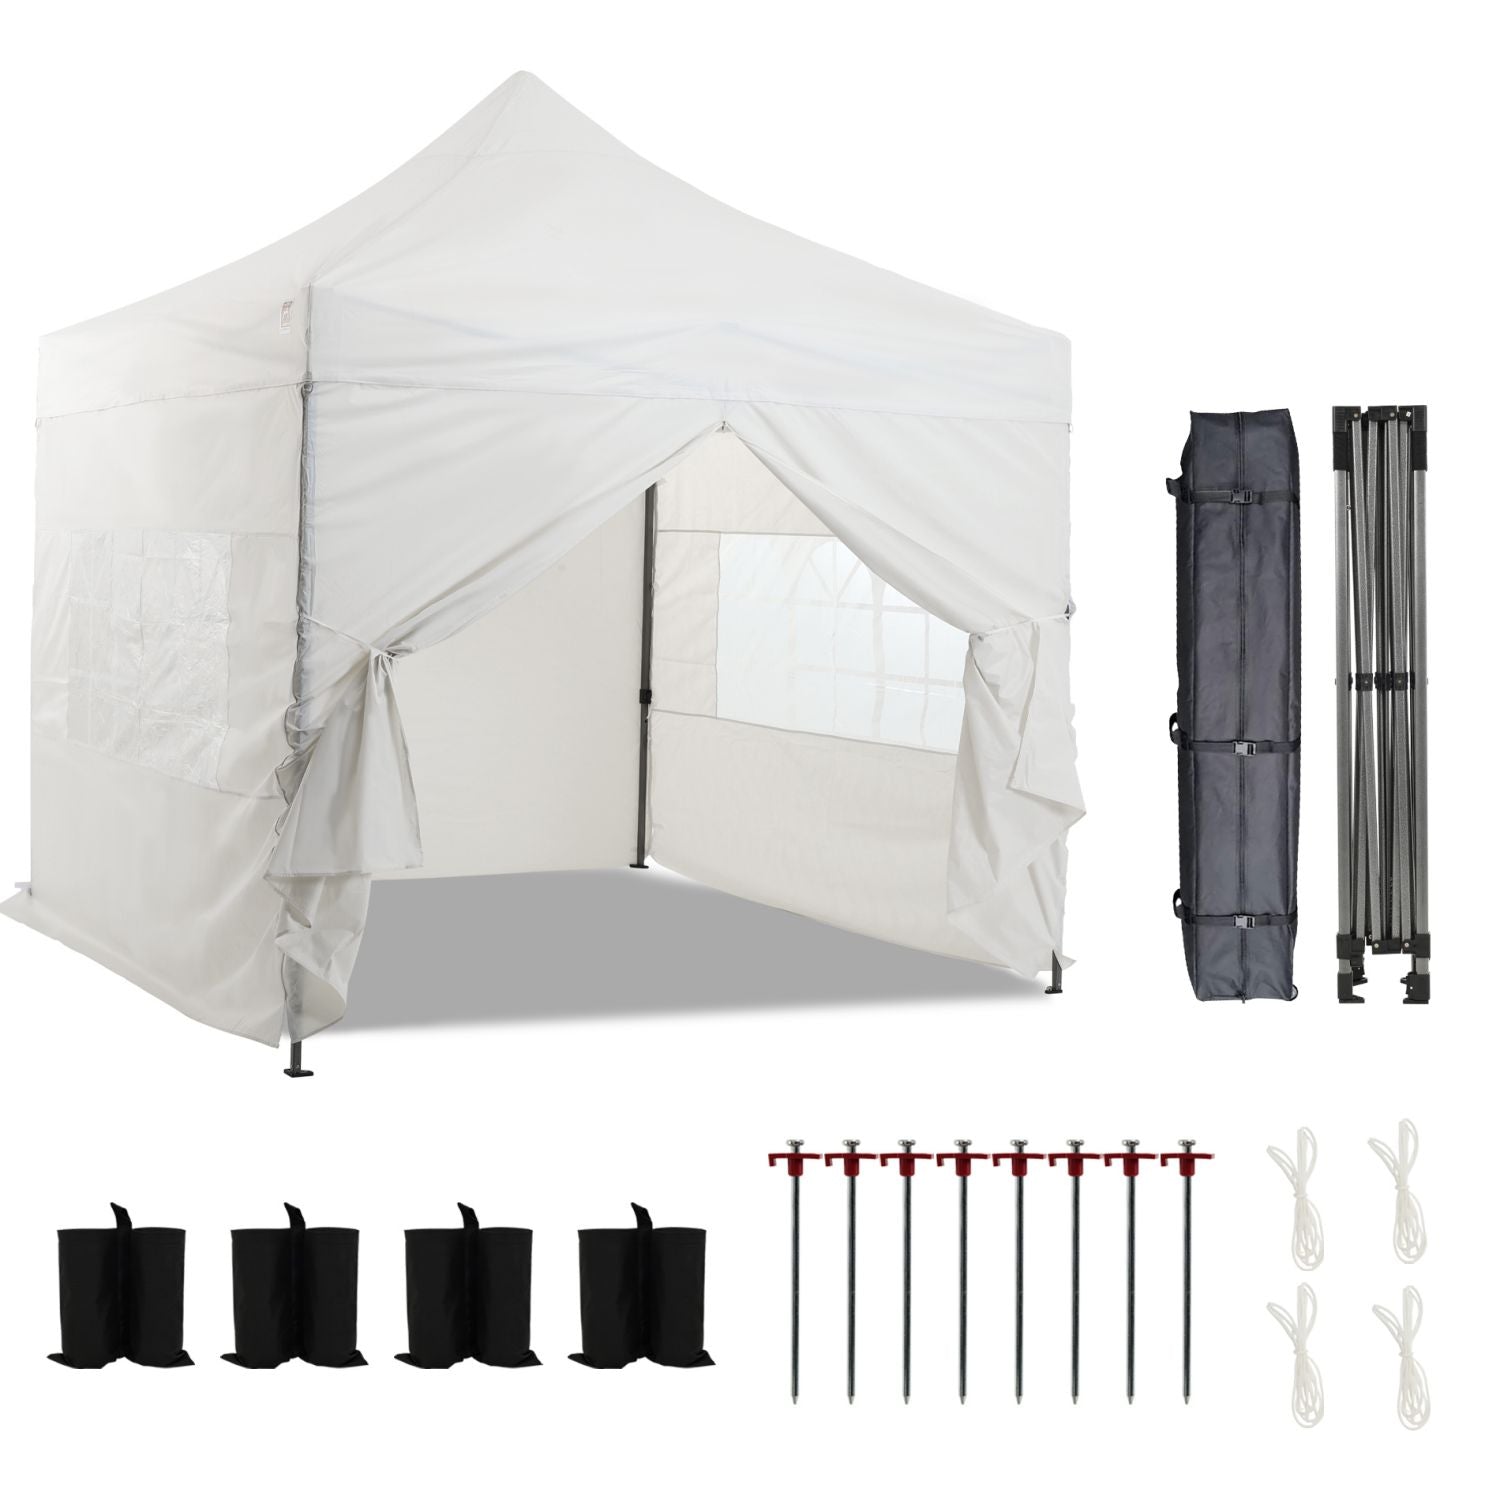 10 x 10 FT. Pop Up Canopy Tent with Windows Sidewalls, 3 Adjustable Heights, with Wheeled Bag  Aoodor  White  